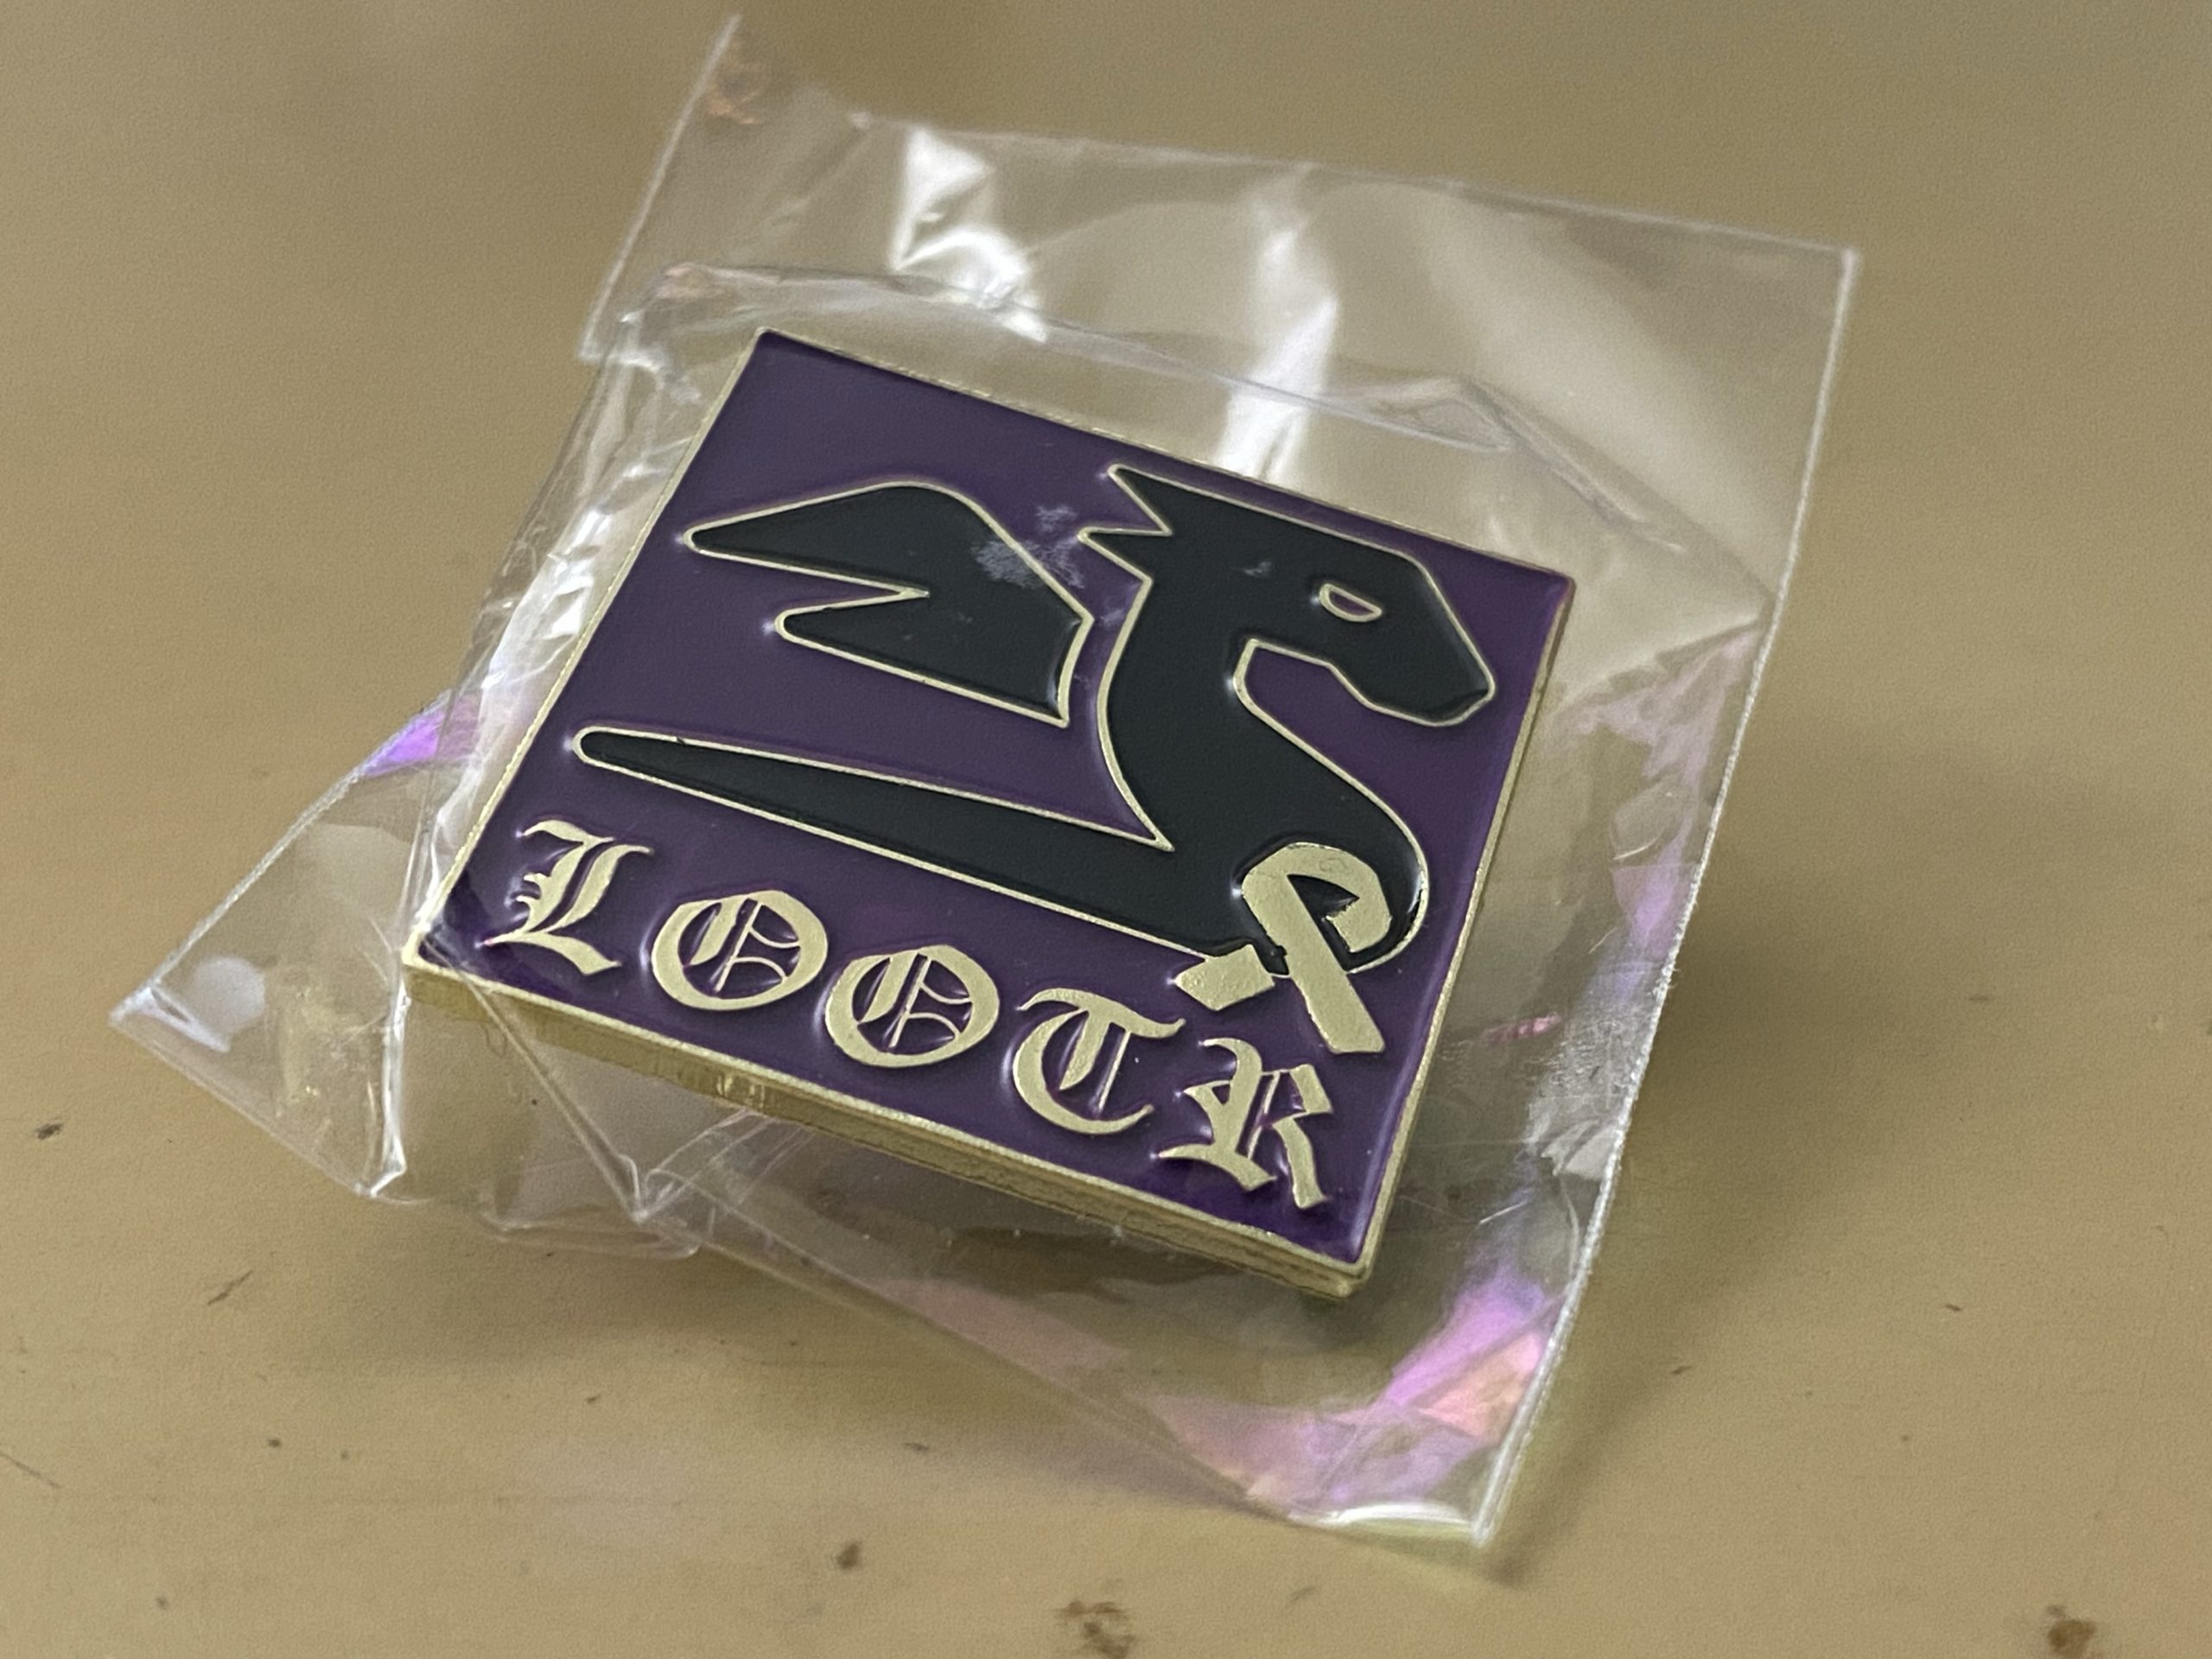 A small square purple enamel pin with a stylized black dragon and the letters “LOOTR” in fancy type.